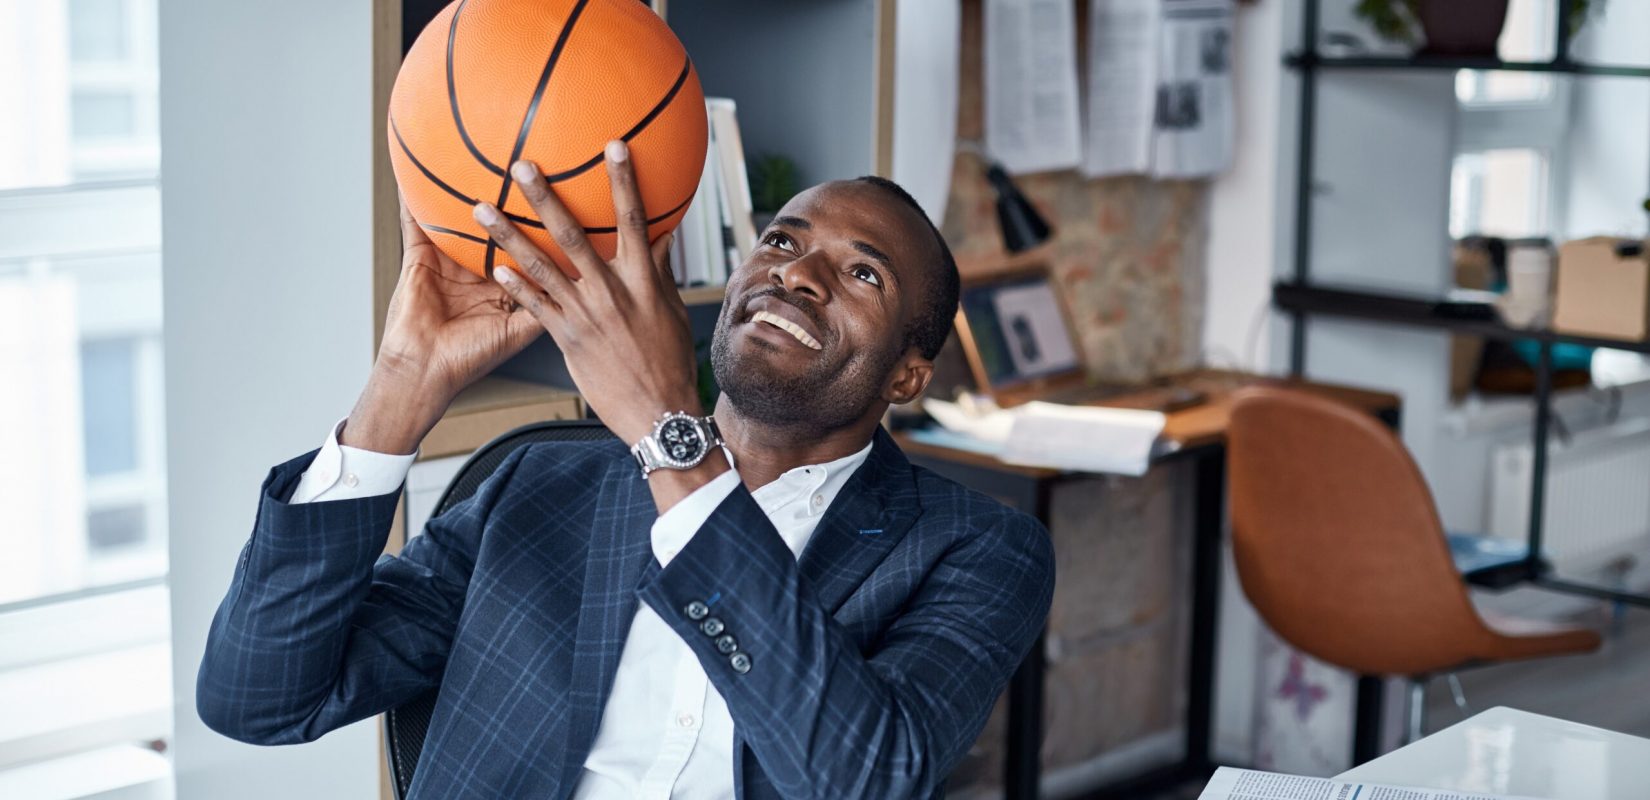 Playful mood. Cheerful young african manager in suit is sitting in office and holding orange basketball with smile. He is looking up while being ready to throwing it